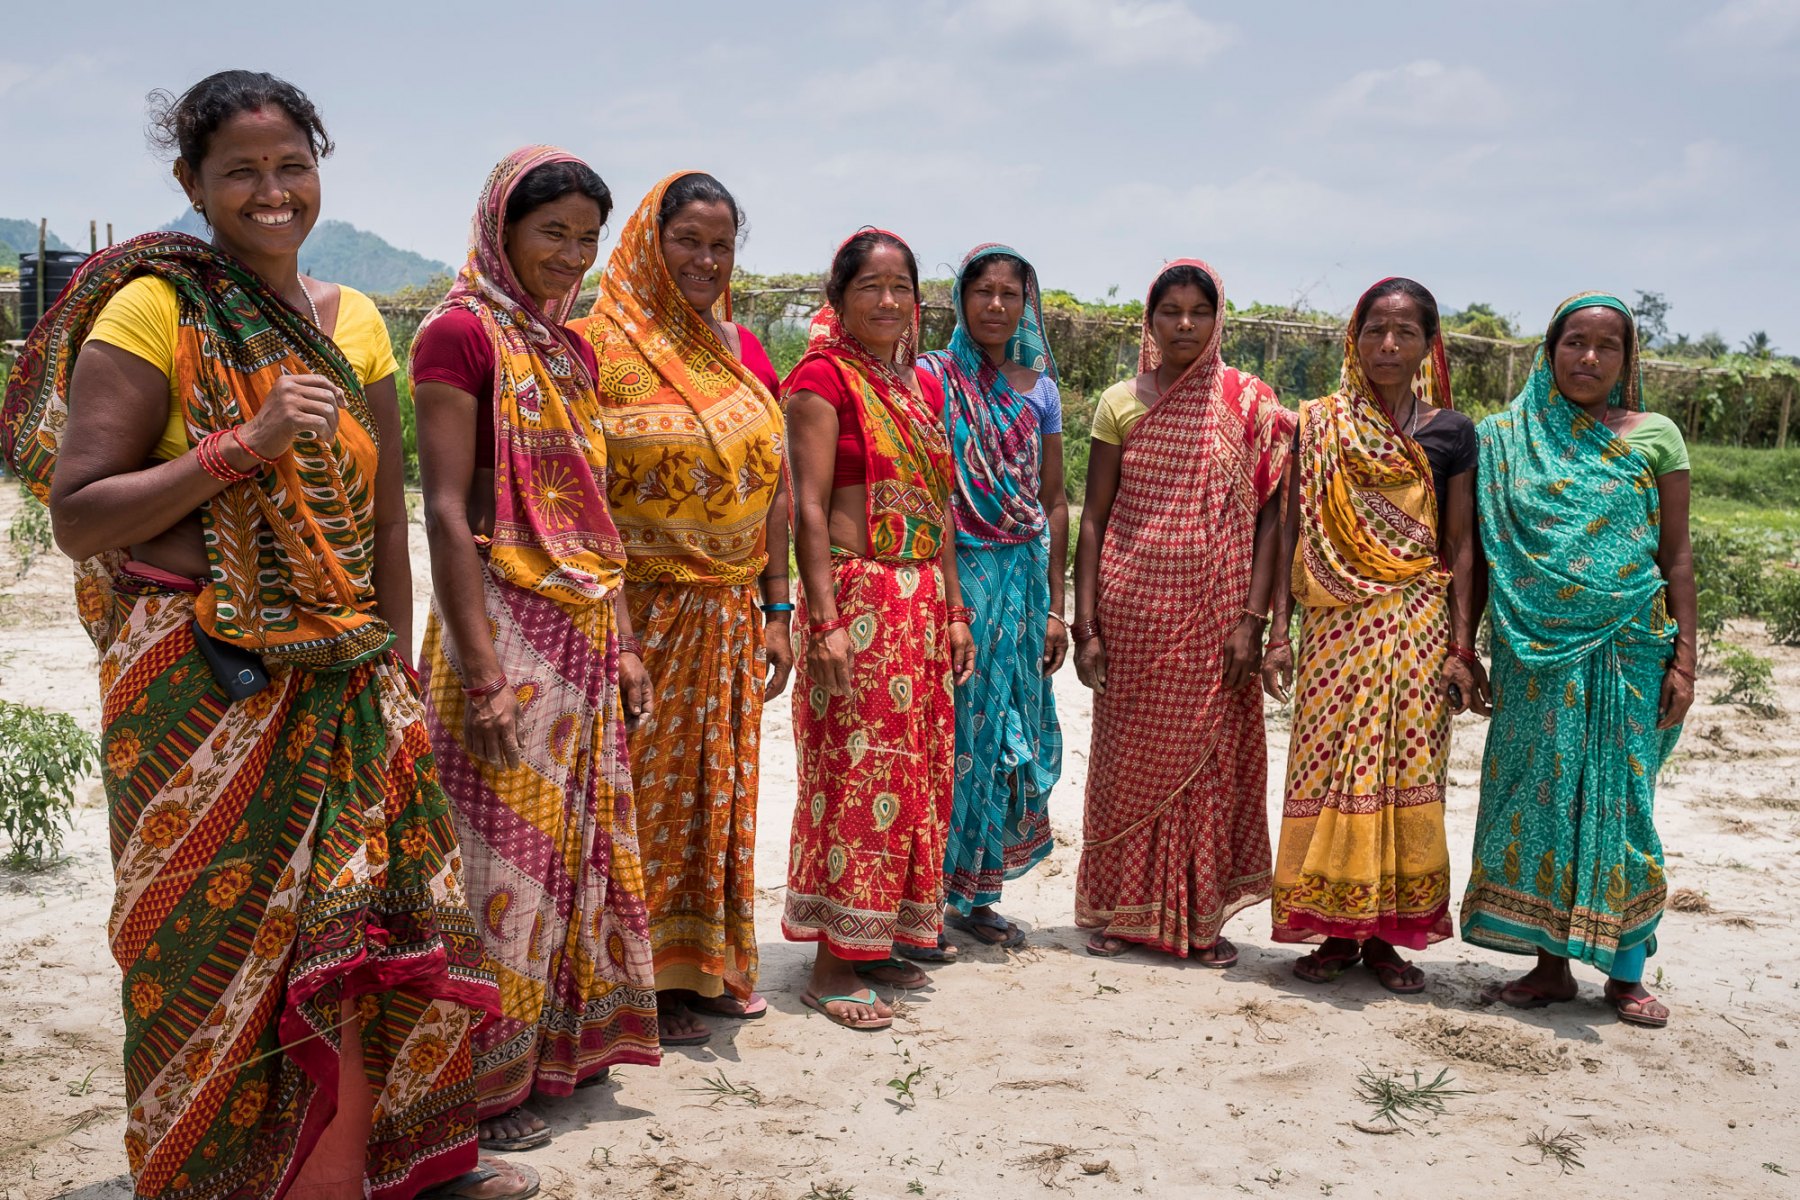 Janaki Devi (left) and other farmers from her group stand for a group photo. Janaki lives in Kanakpatti village, Saptari district, Terai region of Nepal. Janaki Devi is from the indigenous (Adavasi) Choudary group who traditionally are very poor and socially marginalized, she only had attended school for three years. The ACIAR project works with landless, untenured farmers like Janaki Devi and supports them to form groups, approach a landlord who doesn’t use land in the dry season, collectively rent it and have access over the dry season using groundwater and sharing labour. Janaki is the president of her group and sells much of her produce at the local twice-weekly market. This extra money Janaki Devi now makes she uses to help support her son who is currently studying engineering at college.